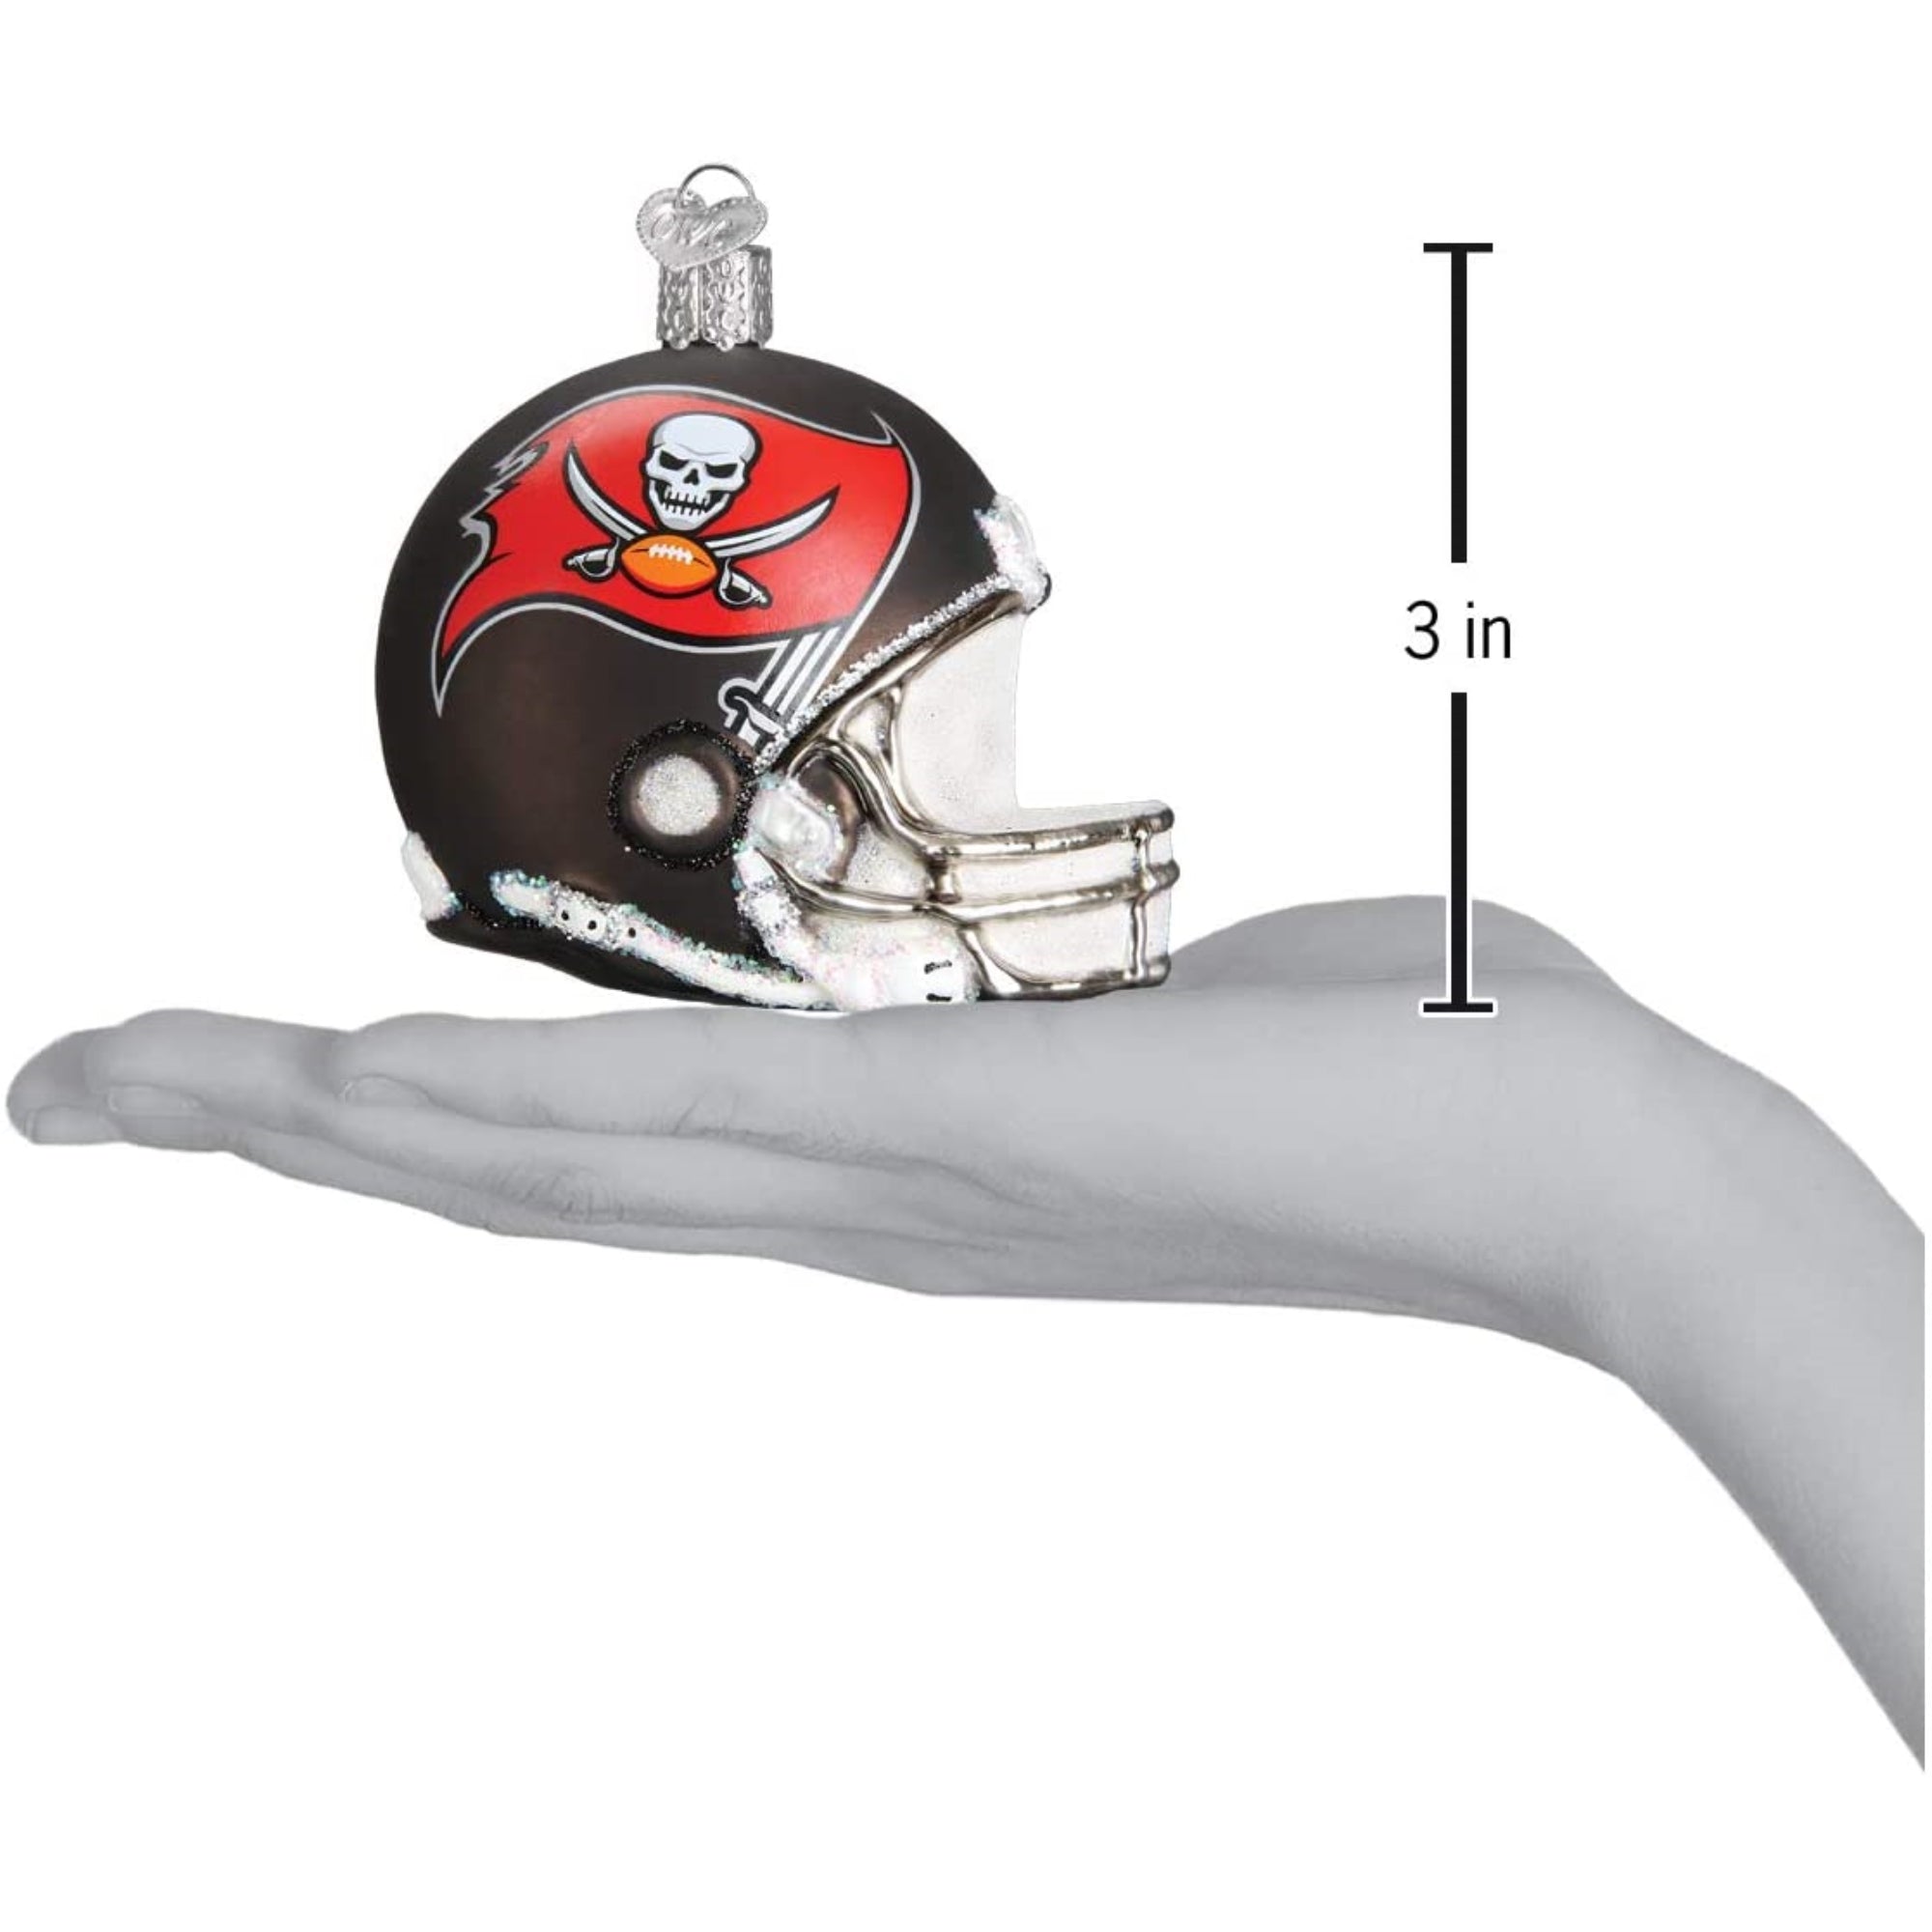 Old World Christmas Tampa Bay Buccaneers Helmet Ornament For Christmas Tree